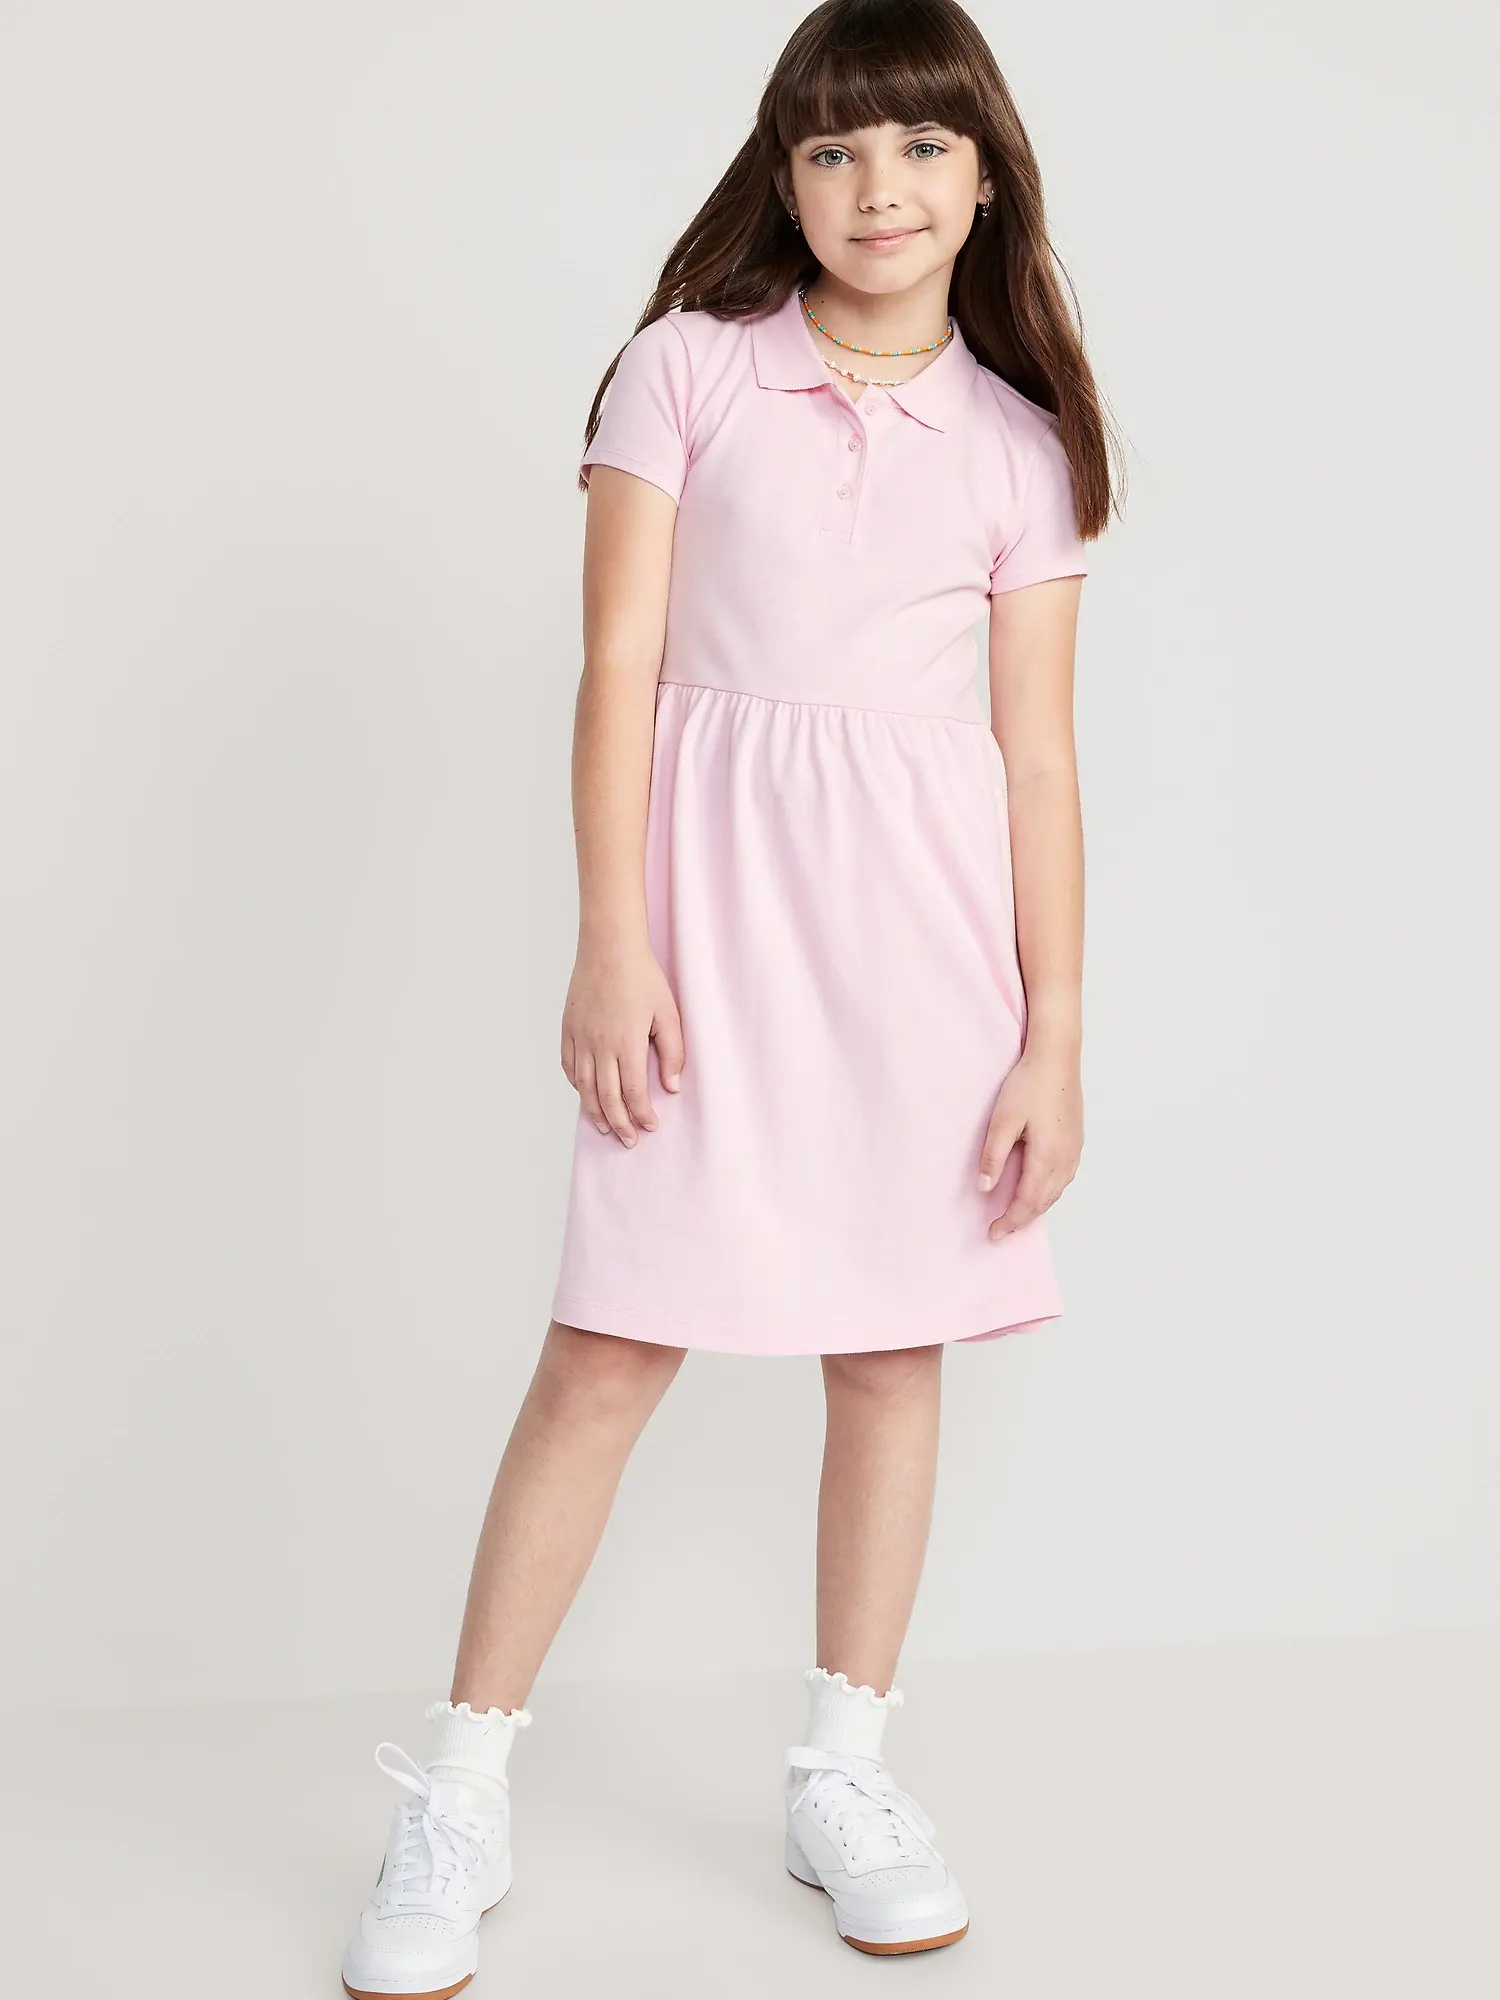 Old Navy School Uniform Fit & Flare Pique Polo Dress for Girls pink. 1